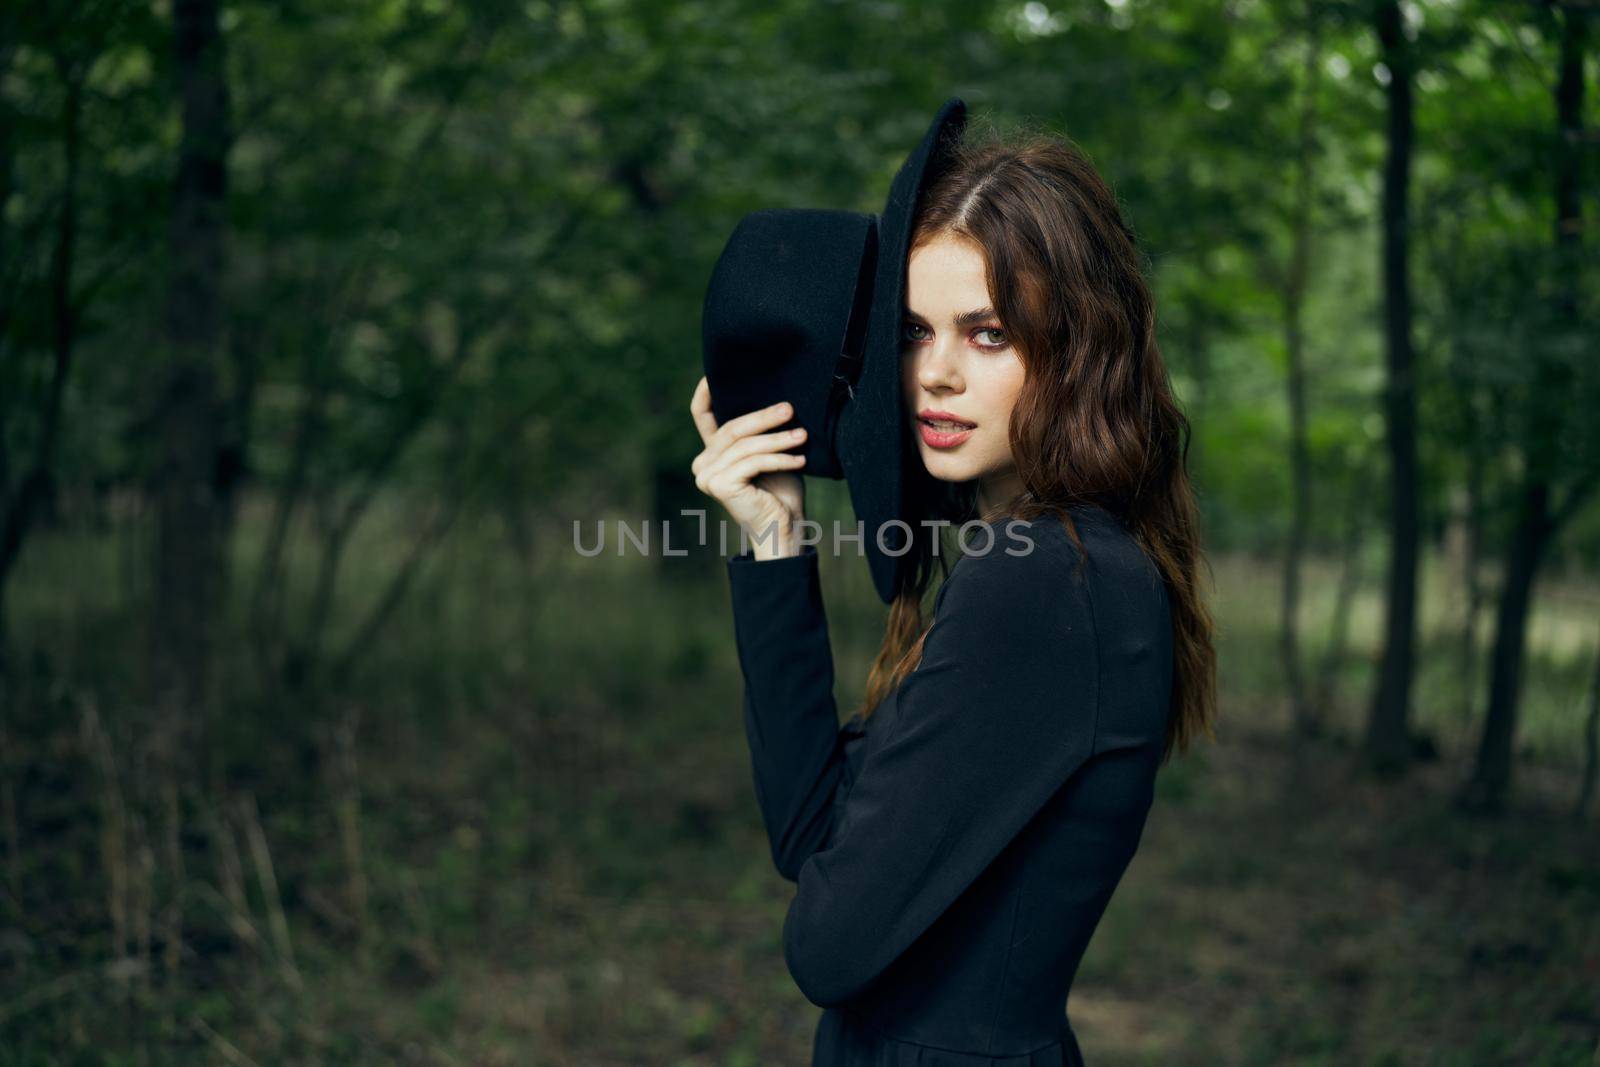 woman in the forest in a black hat gothic style Witch costume by Vichizh